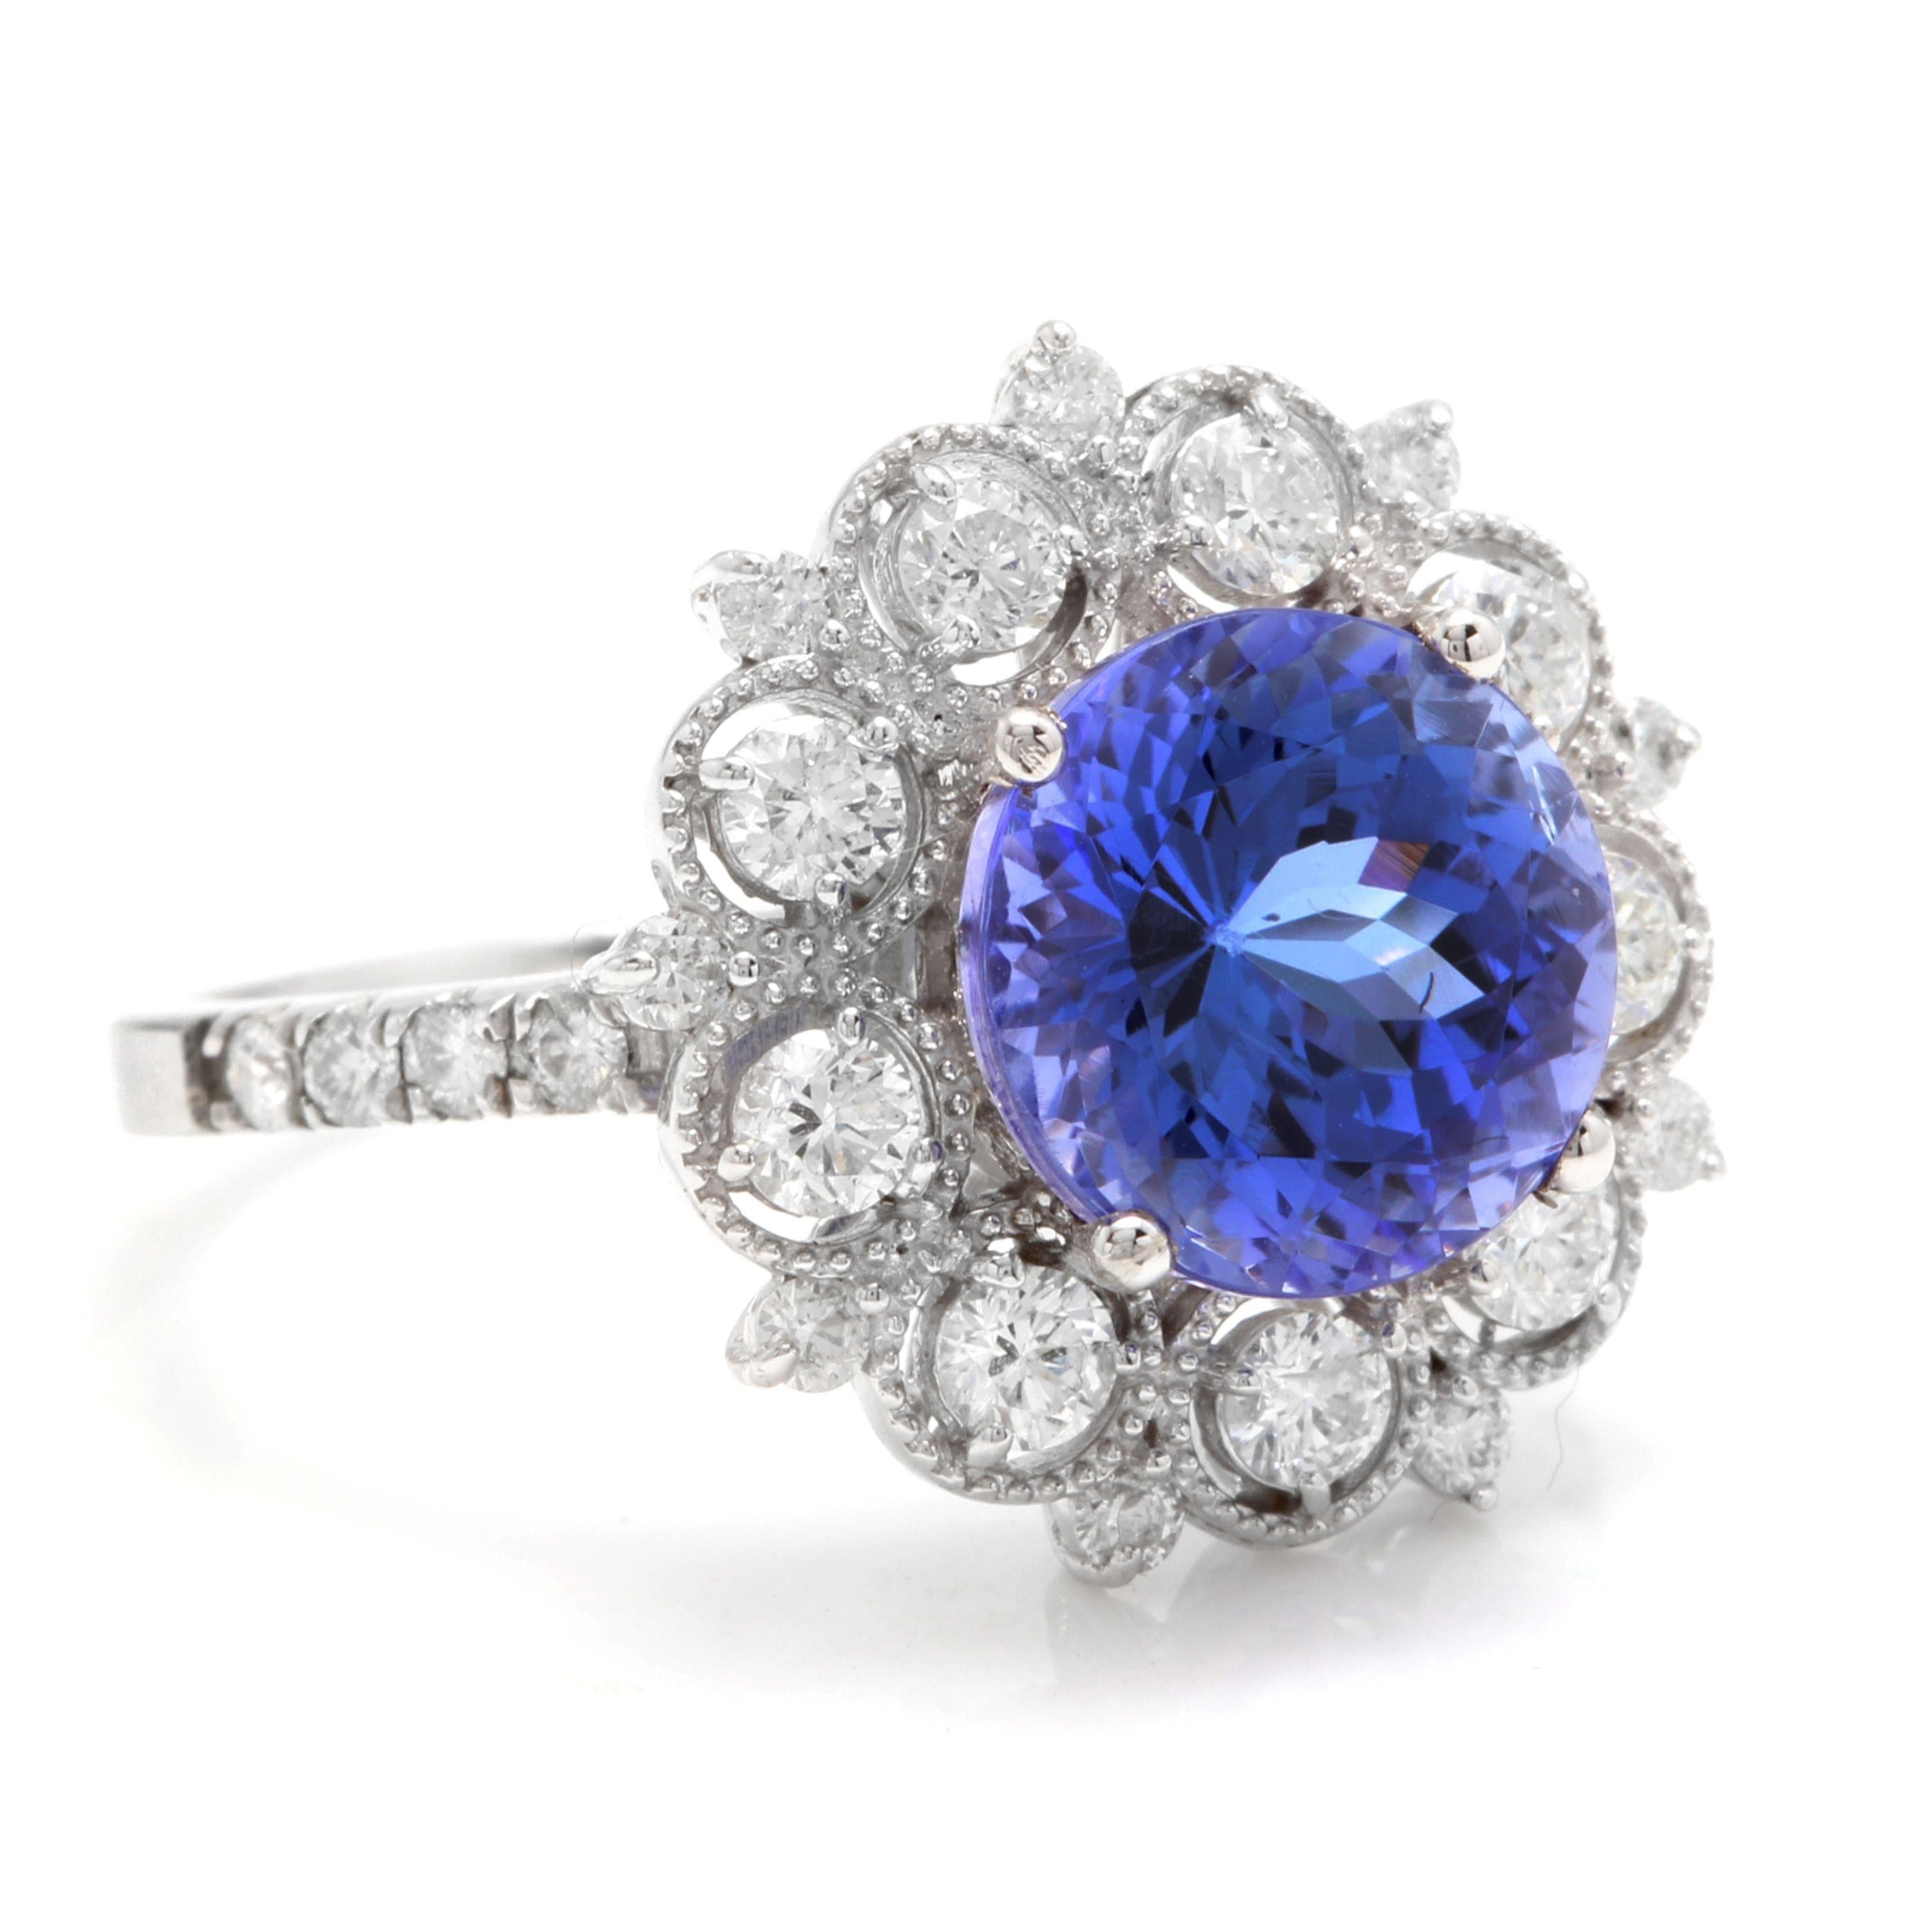 5.20 Carats Natural Very Nice Looking Tanzanite and Diamond 14K Solid White Gold Ring

Total Natural Round Cut Tanzanite Weight is: Approx. 4.00 Carats

Tanzanite Measures: Approx. 9.30mm

Natural Round Diamonds Weight: Approx. 1.20 Carats (color